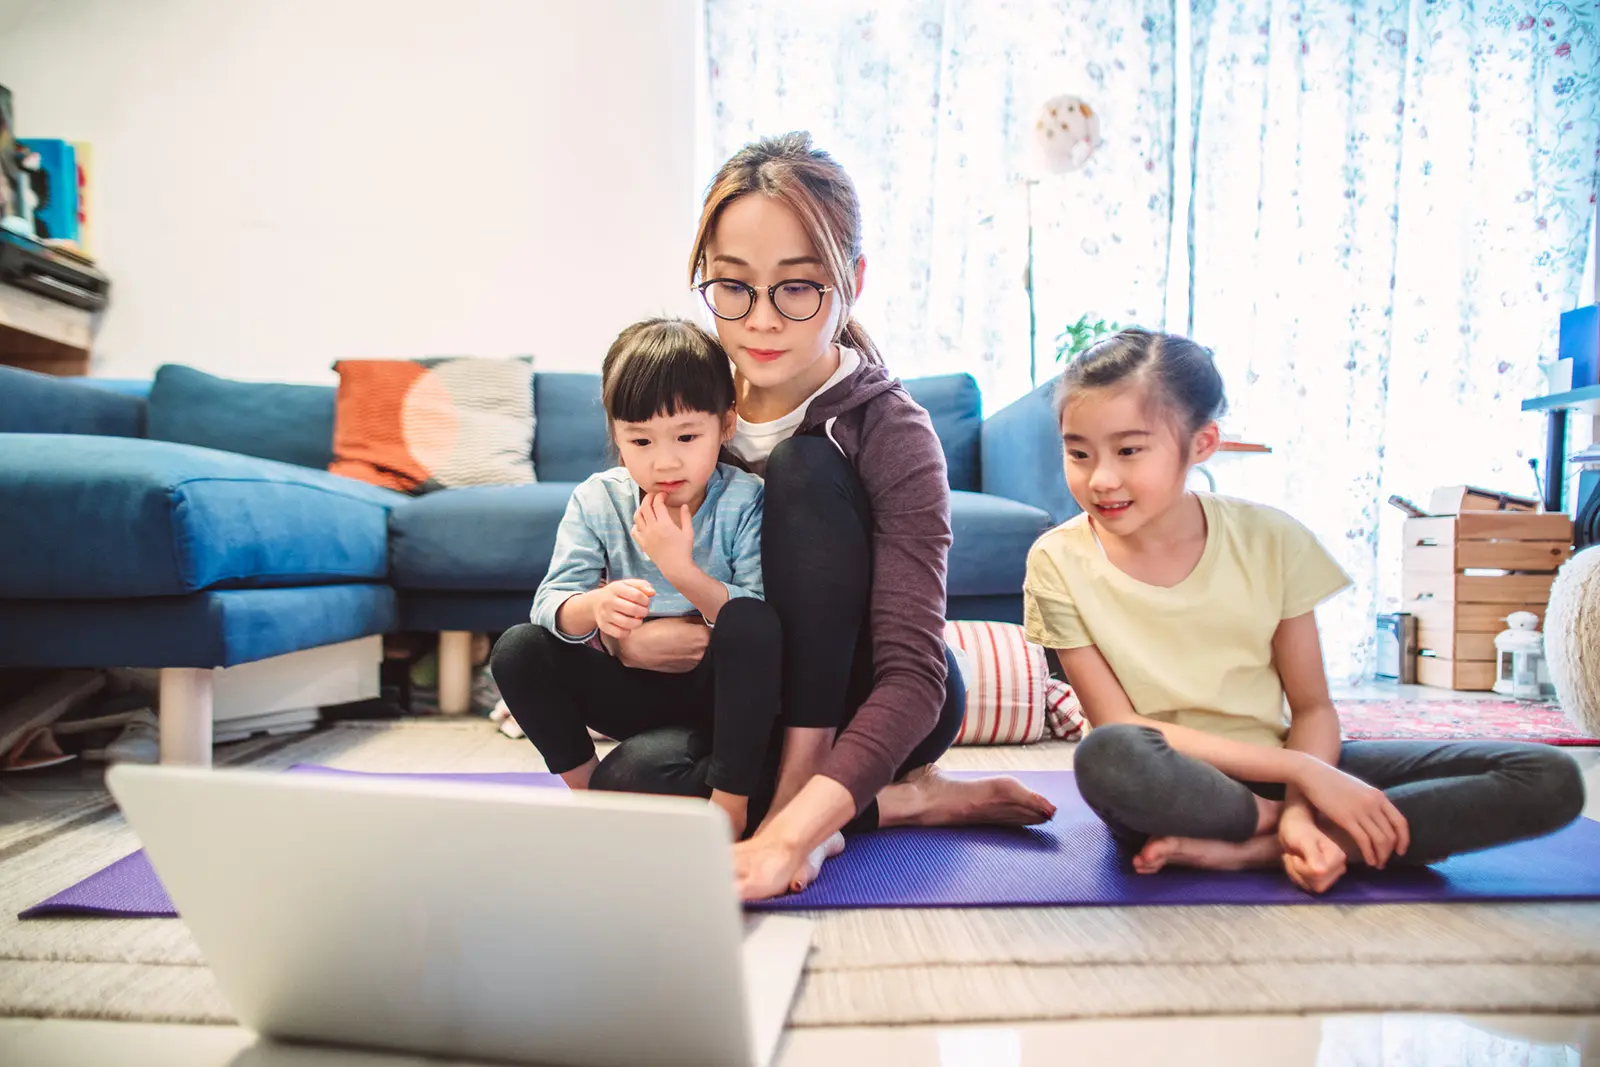 Parent with two children sitting on yoga mat in living room looking at laptop screen